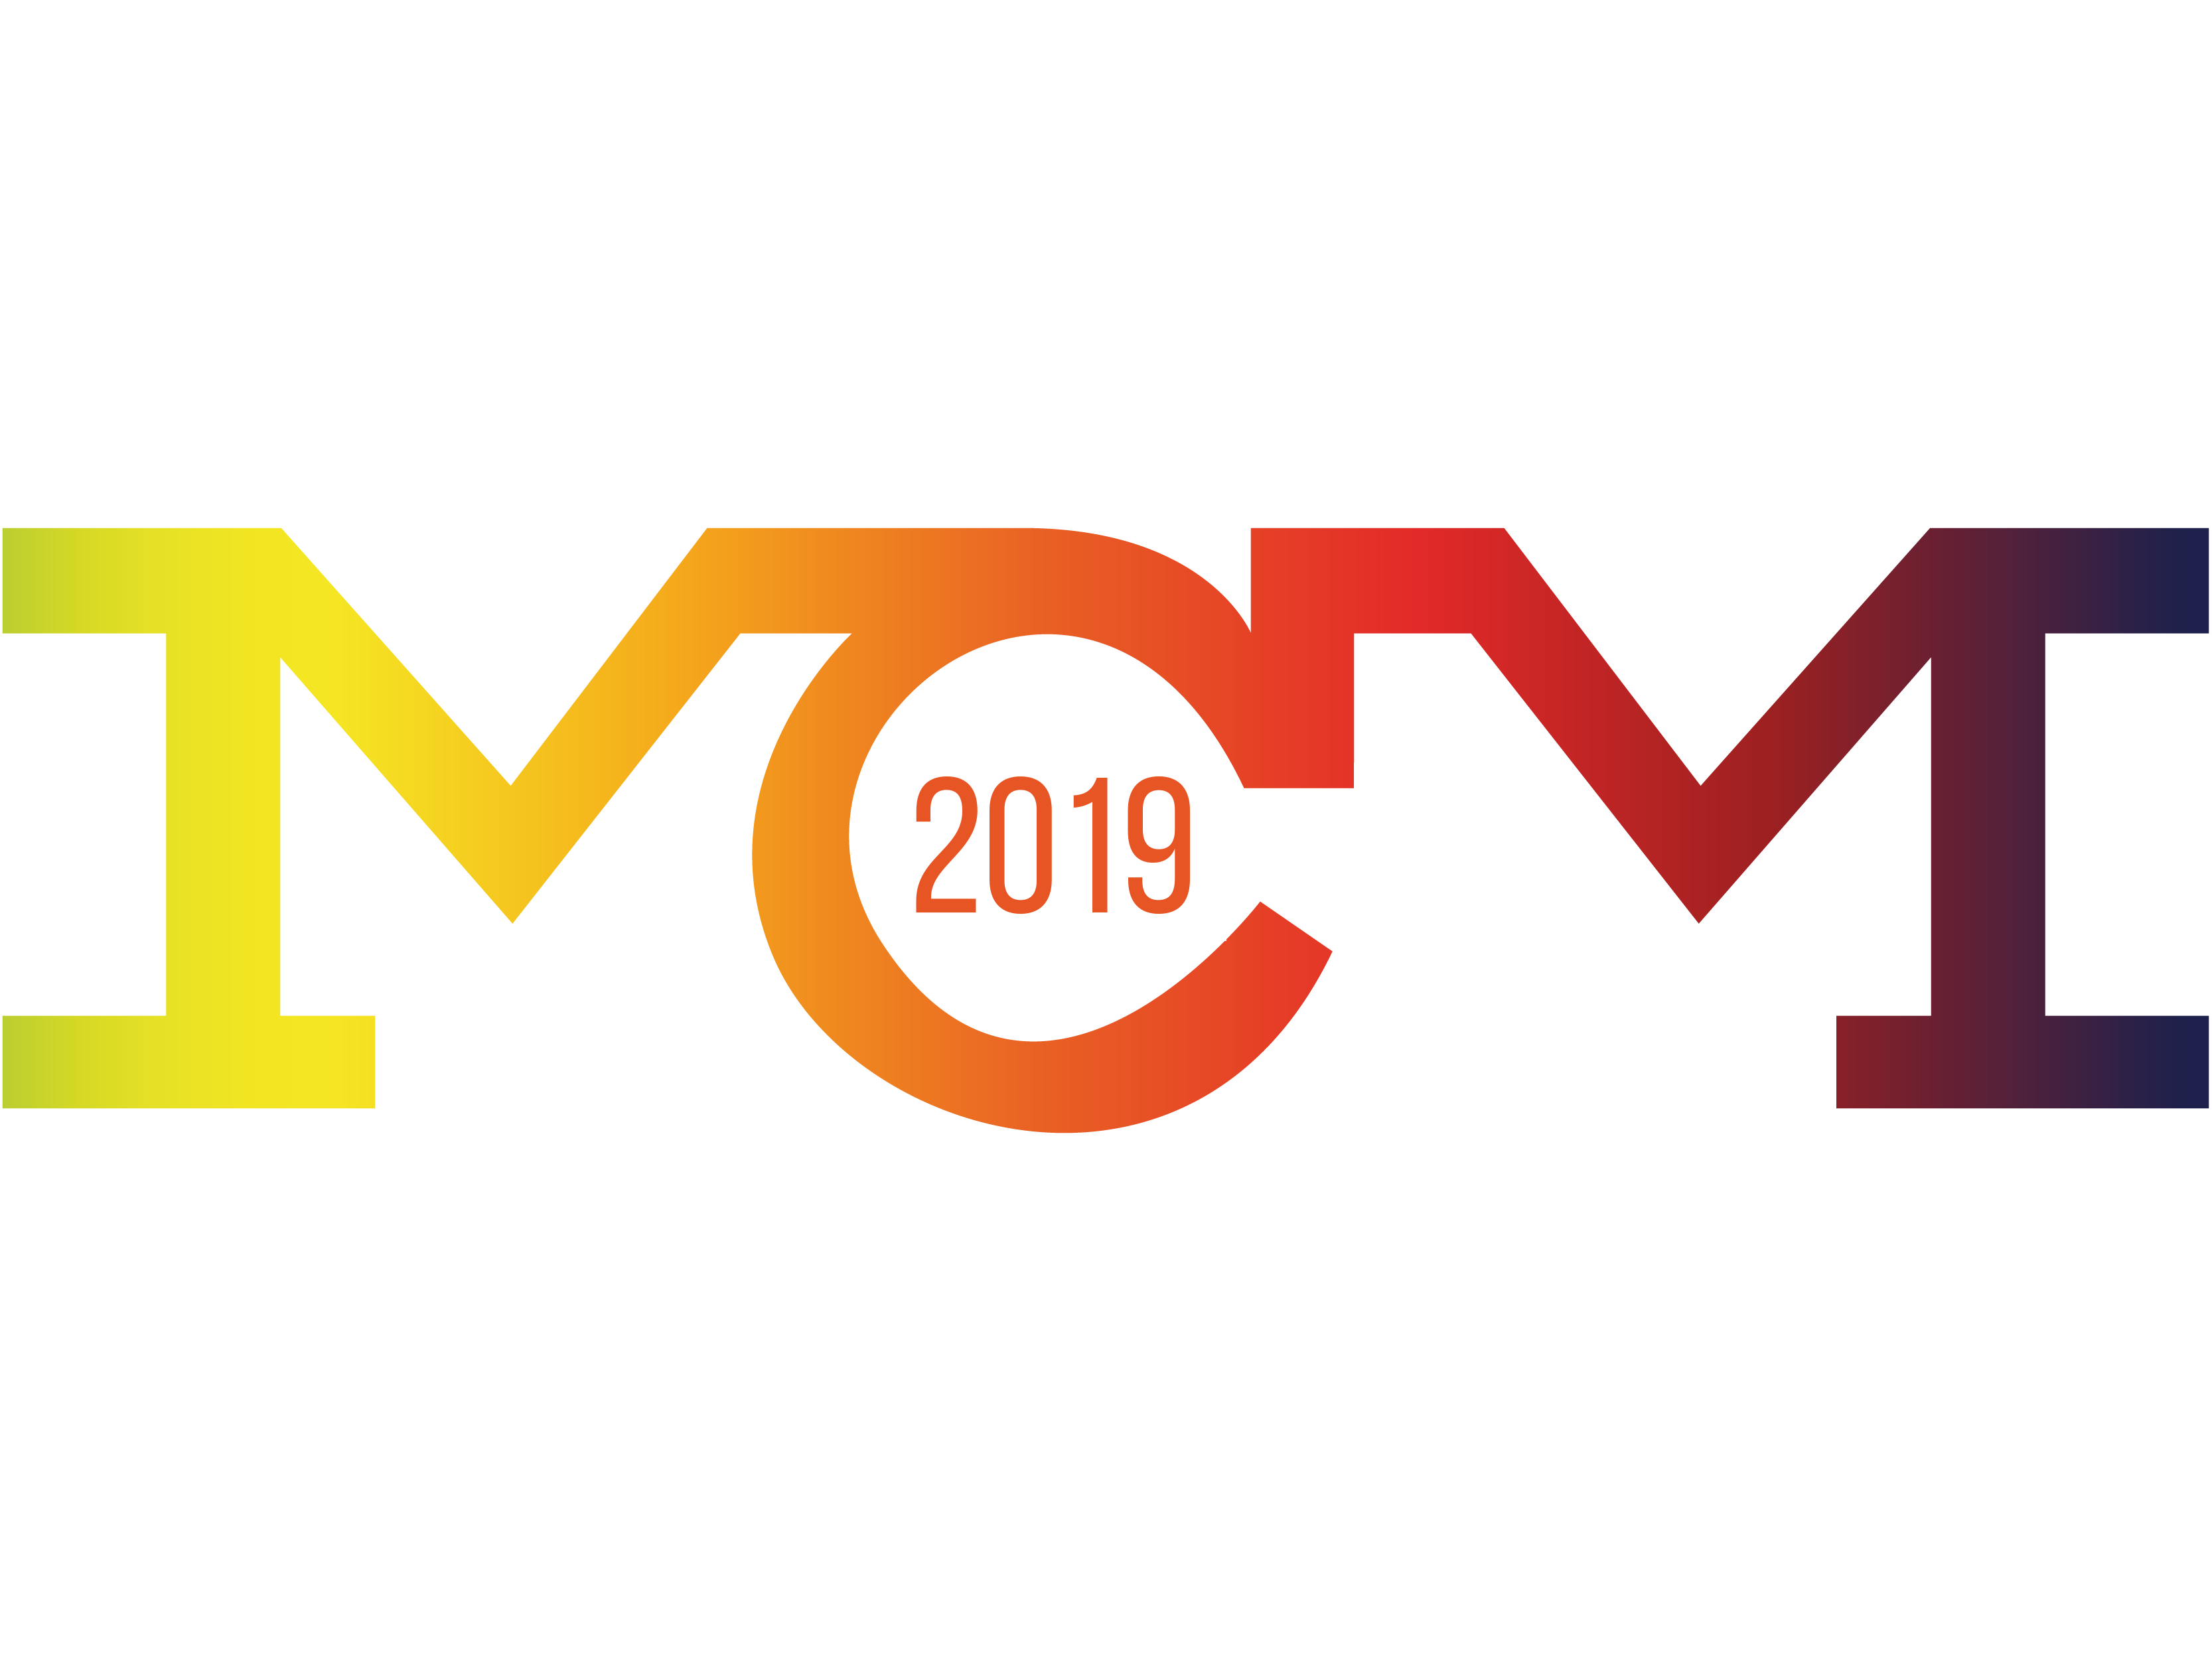 4th World Congress on Mechanical, Chemical, and Material Engineering, Madrid, Spain, August 15 - 17, 2019